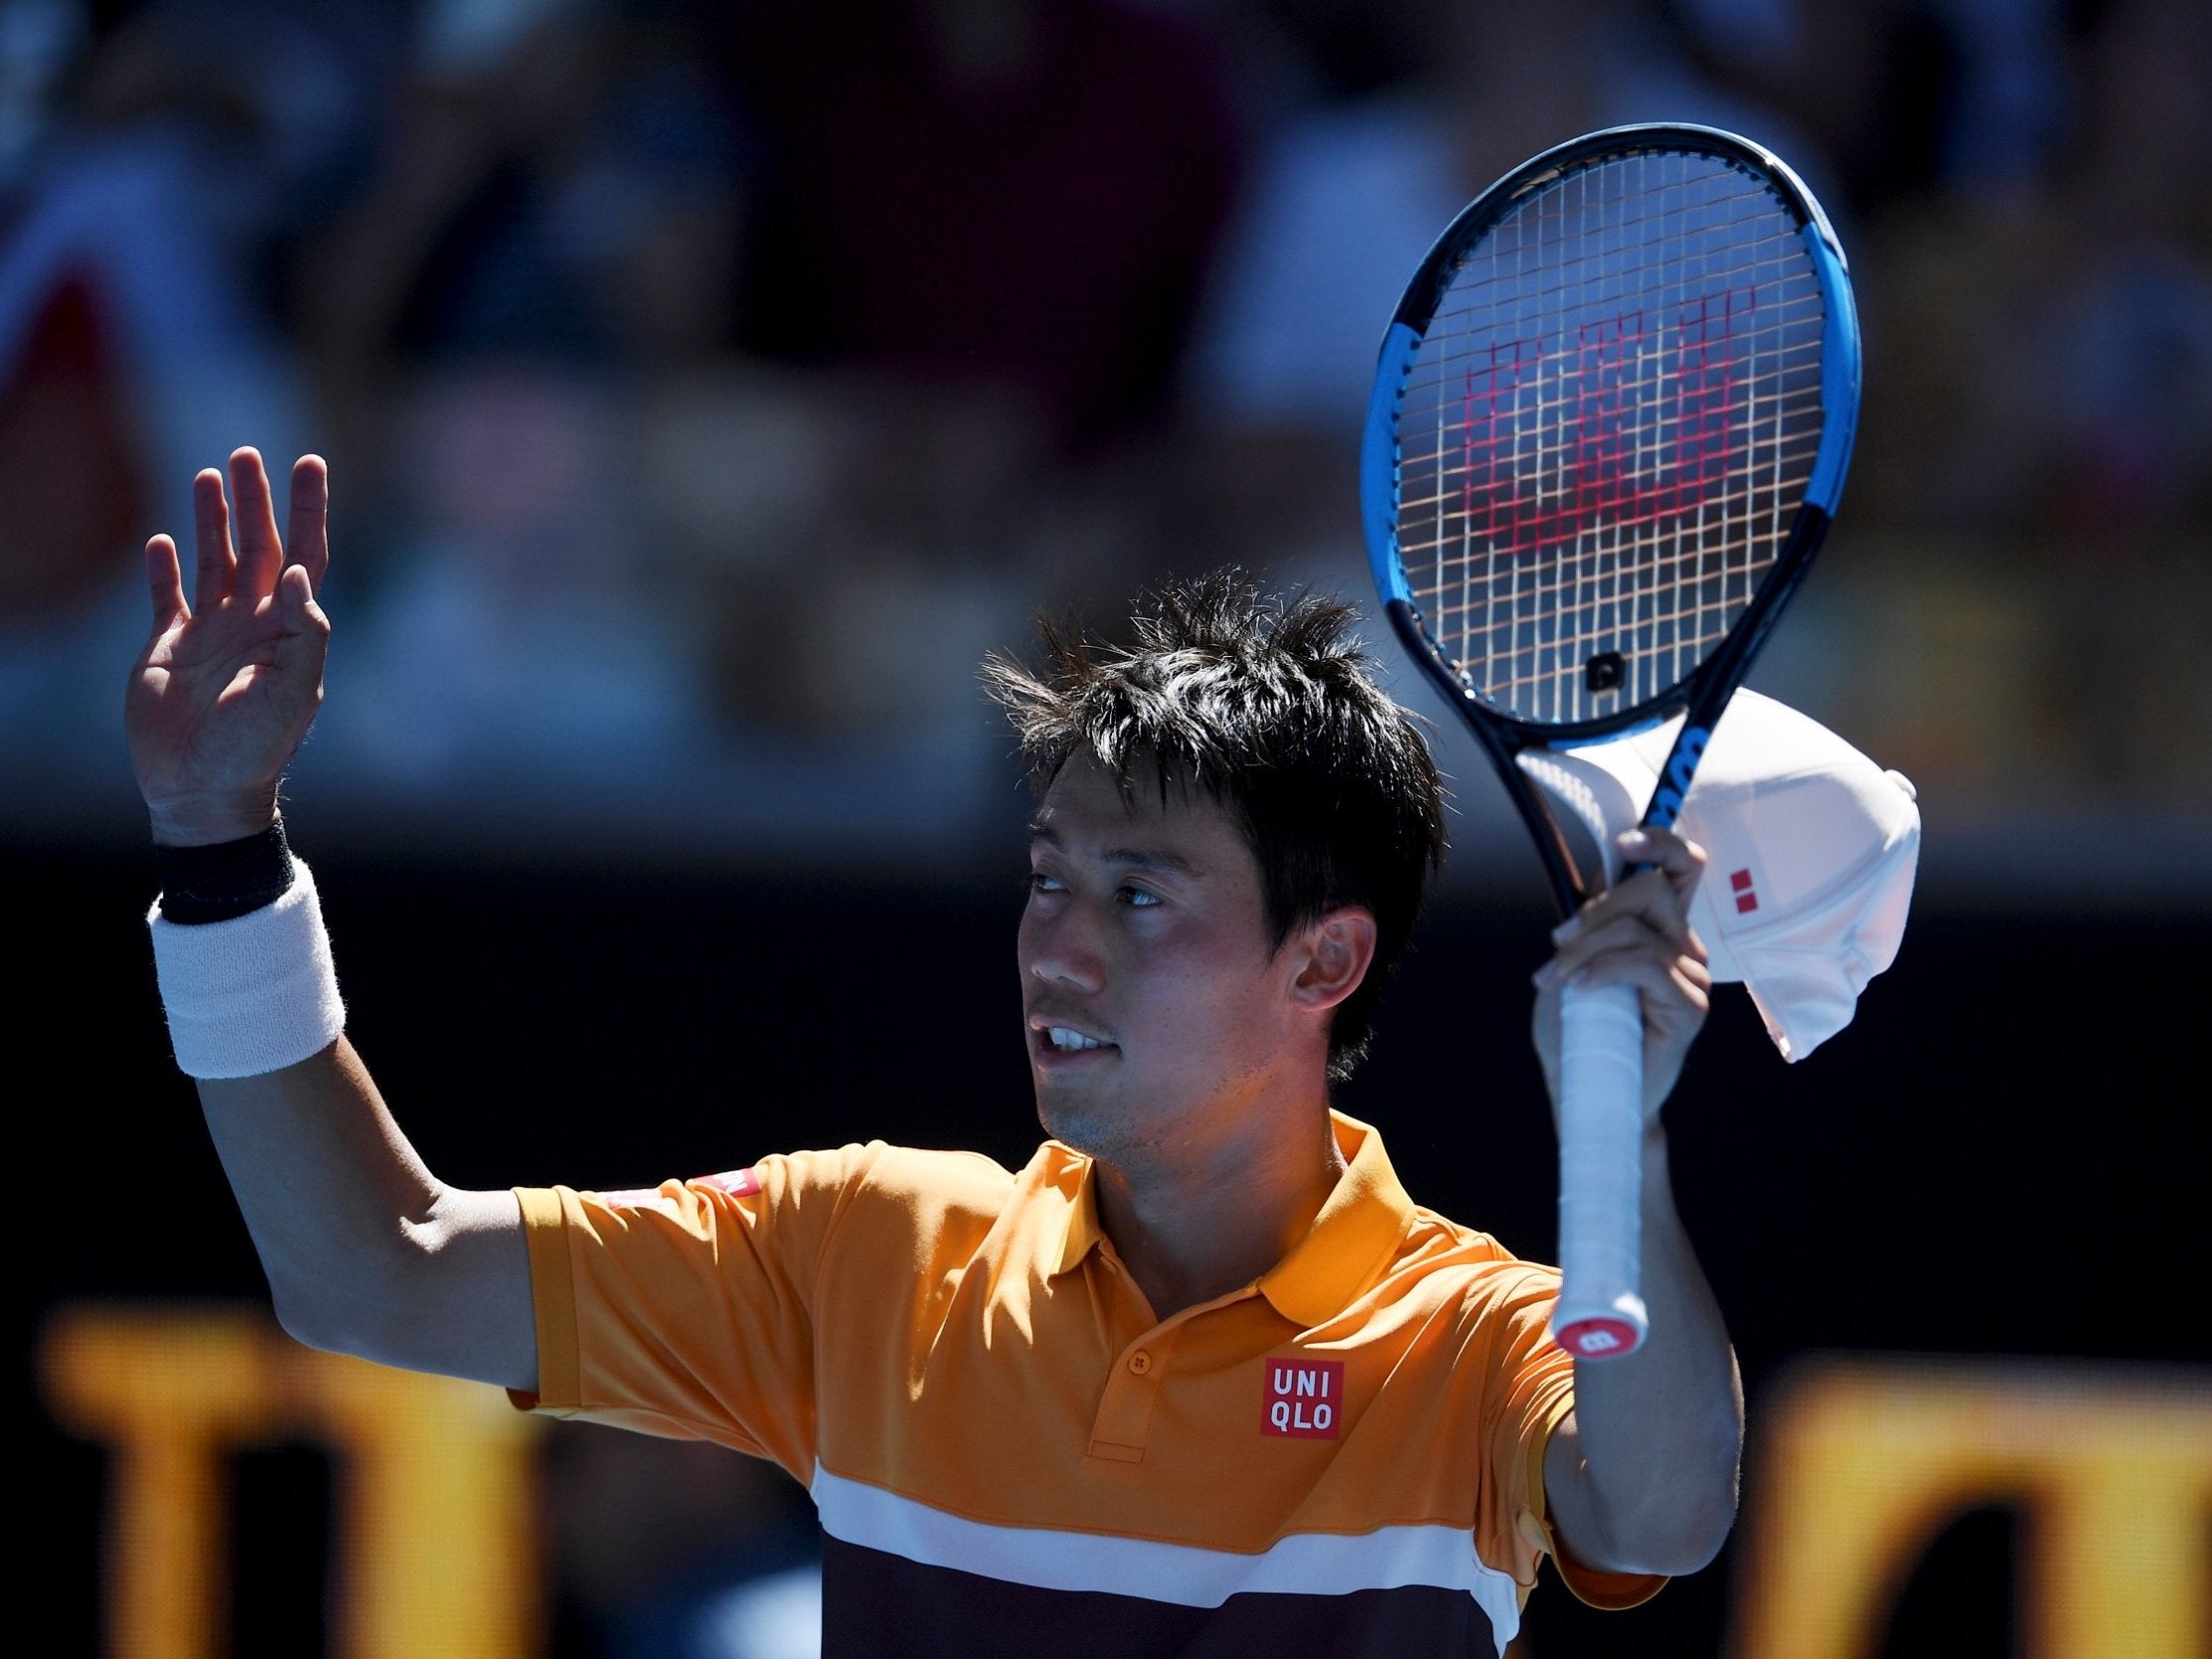 Kei Nishikori salutes the crowd after defeating Joao Sousa in the third round